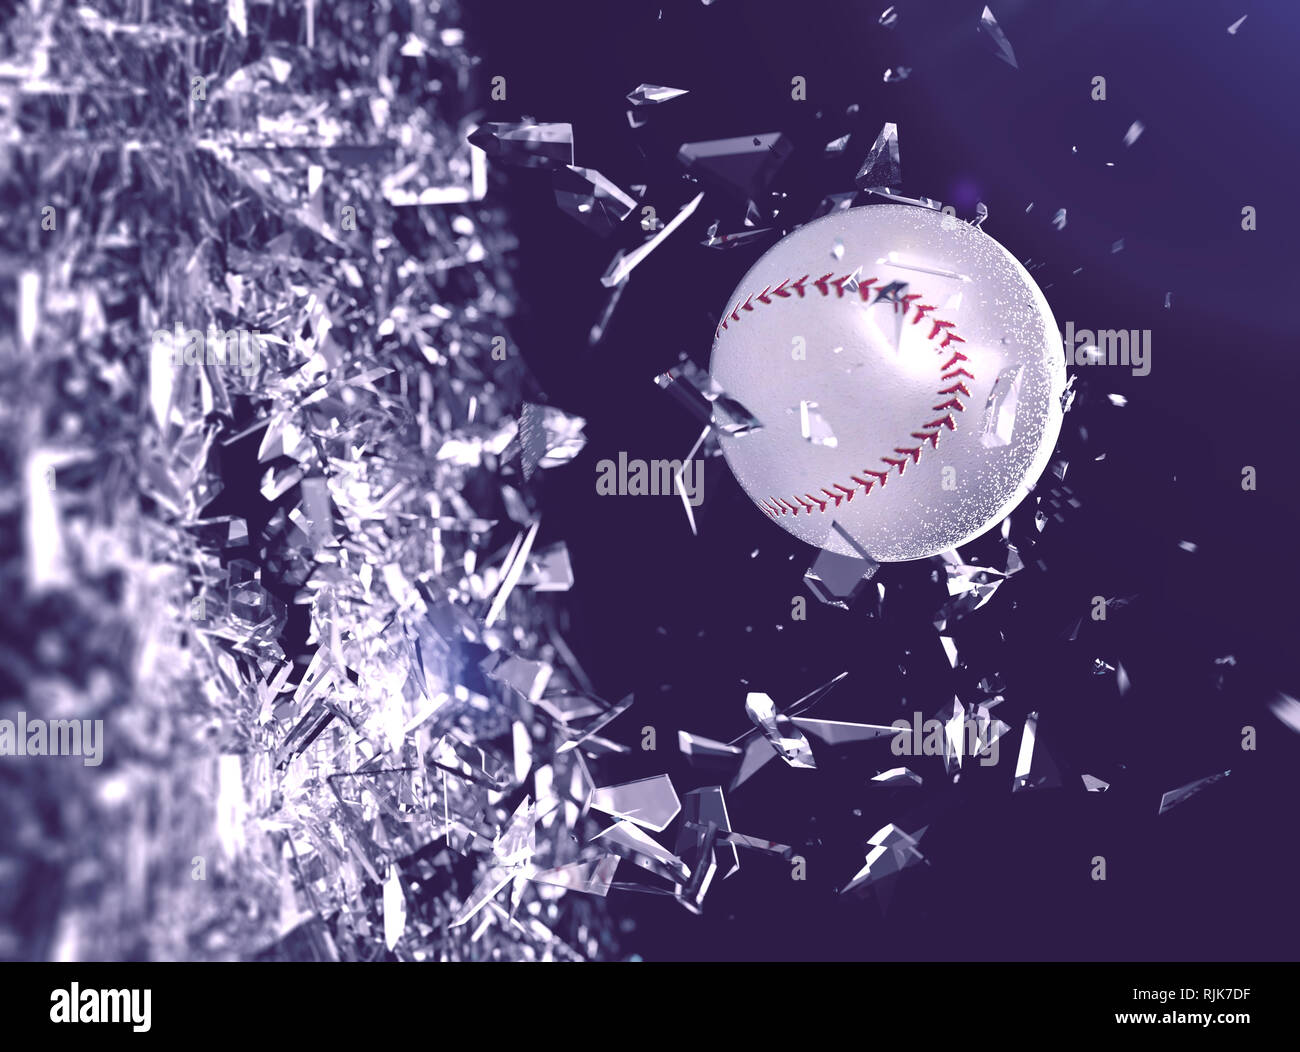 Baseball ball in motion breaking the glass.Concept of action and strength in team sport. Sports concept background.Baseball. 3d illustration Stock Photo